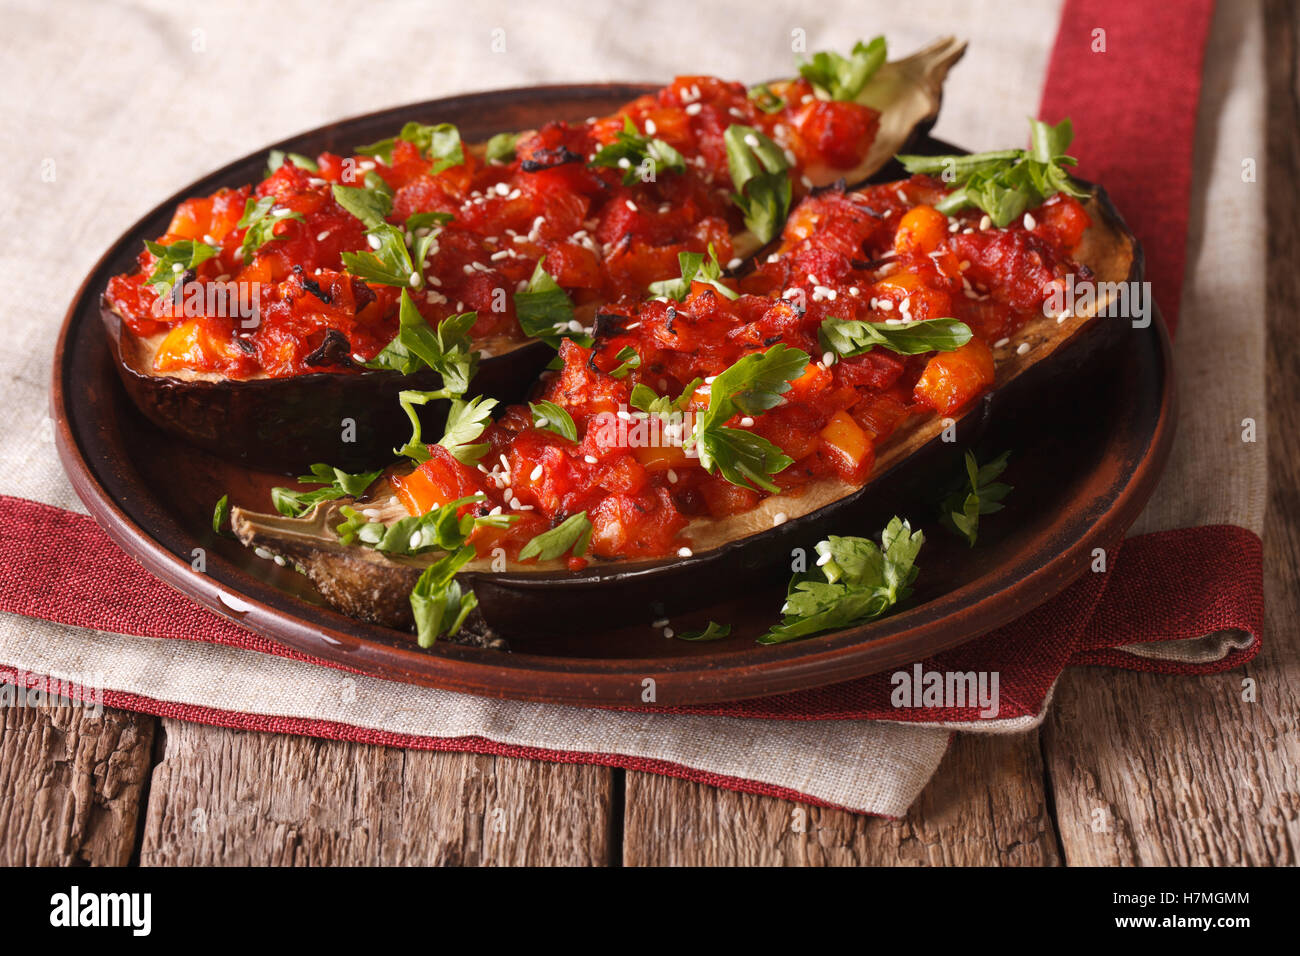 Turkish halves of baked eggplant stuffed with vegetables close-up on a plate. horizontal Stock Photo